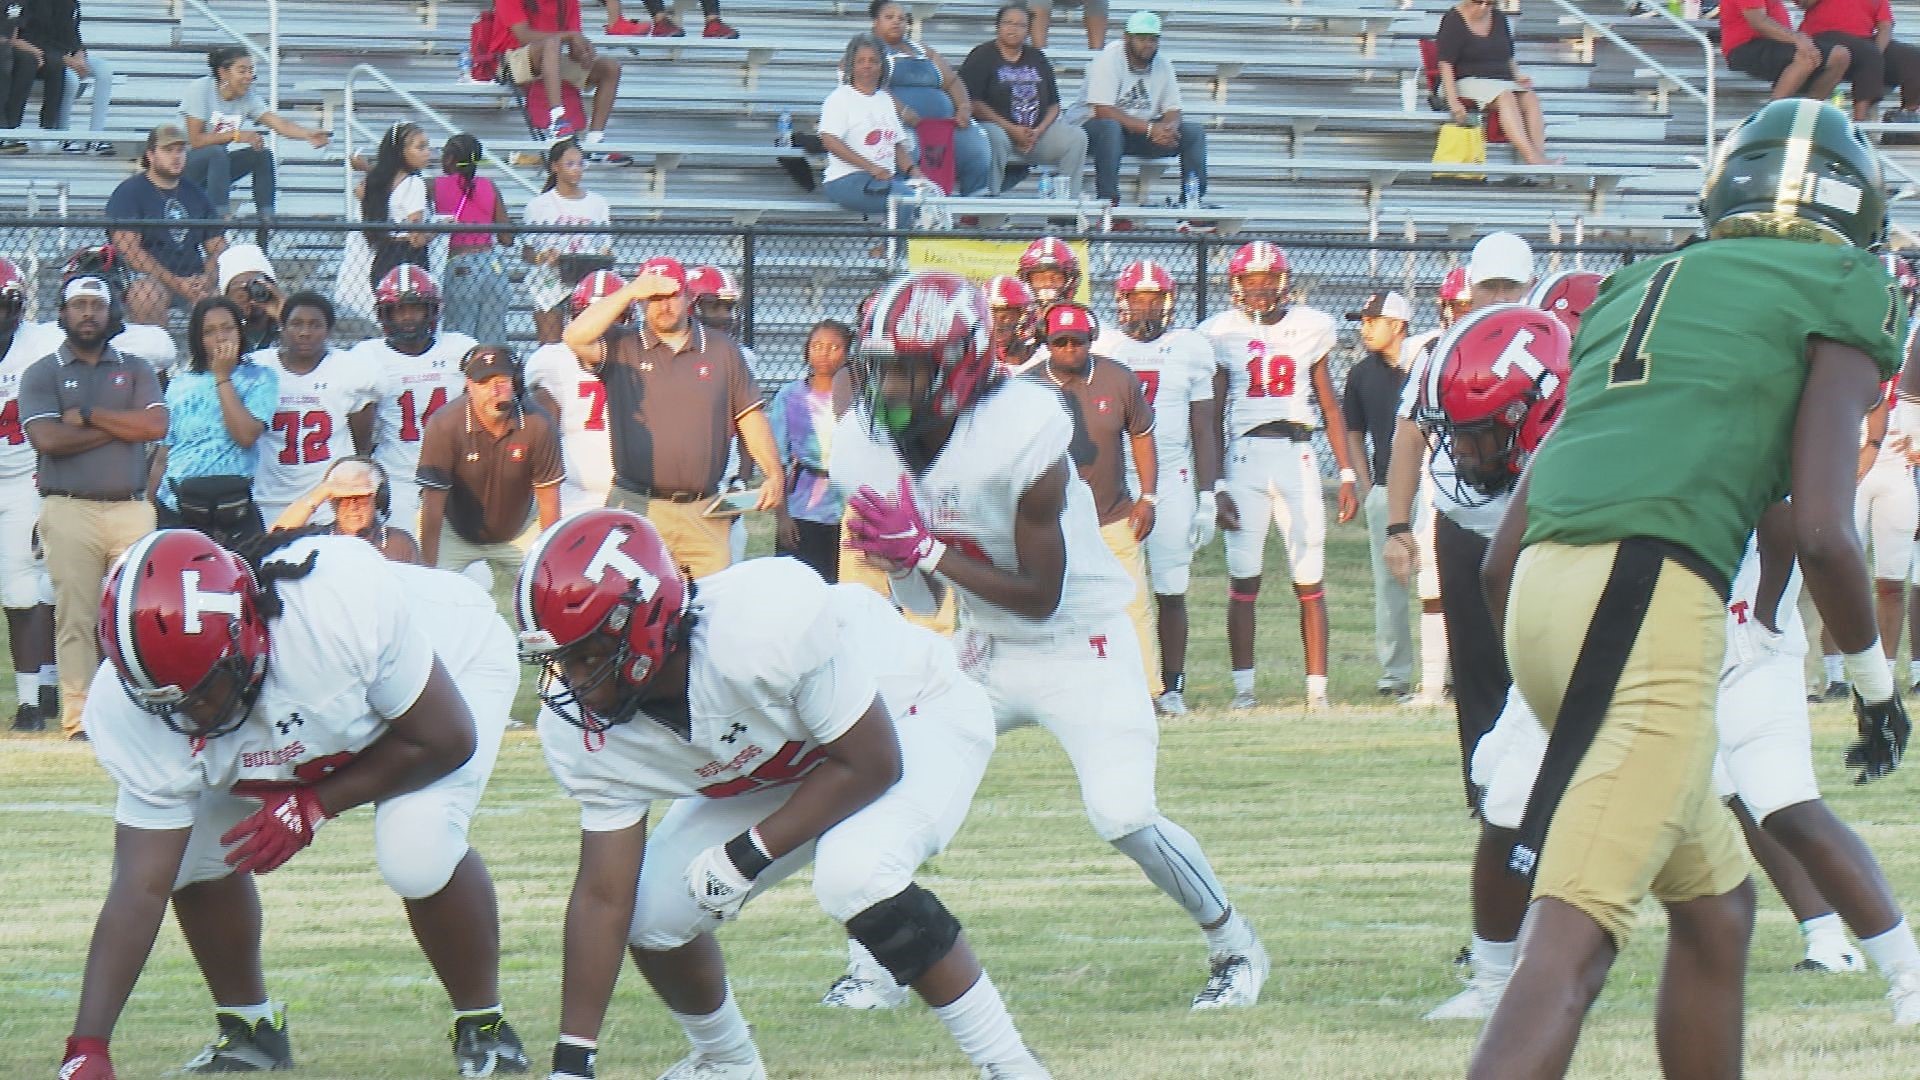 Friday Football Fever matchup between Thomasville vs. Smith